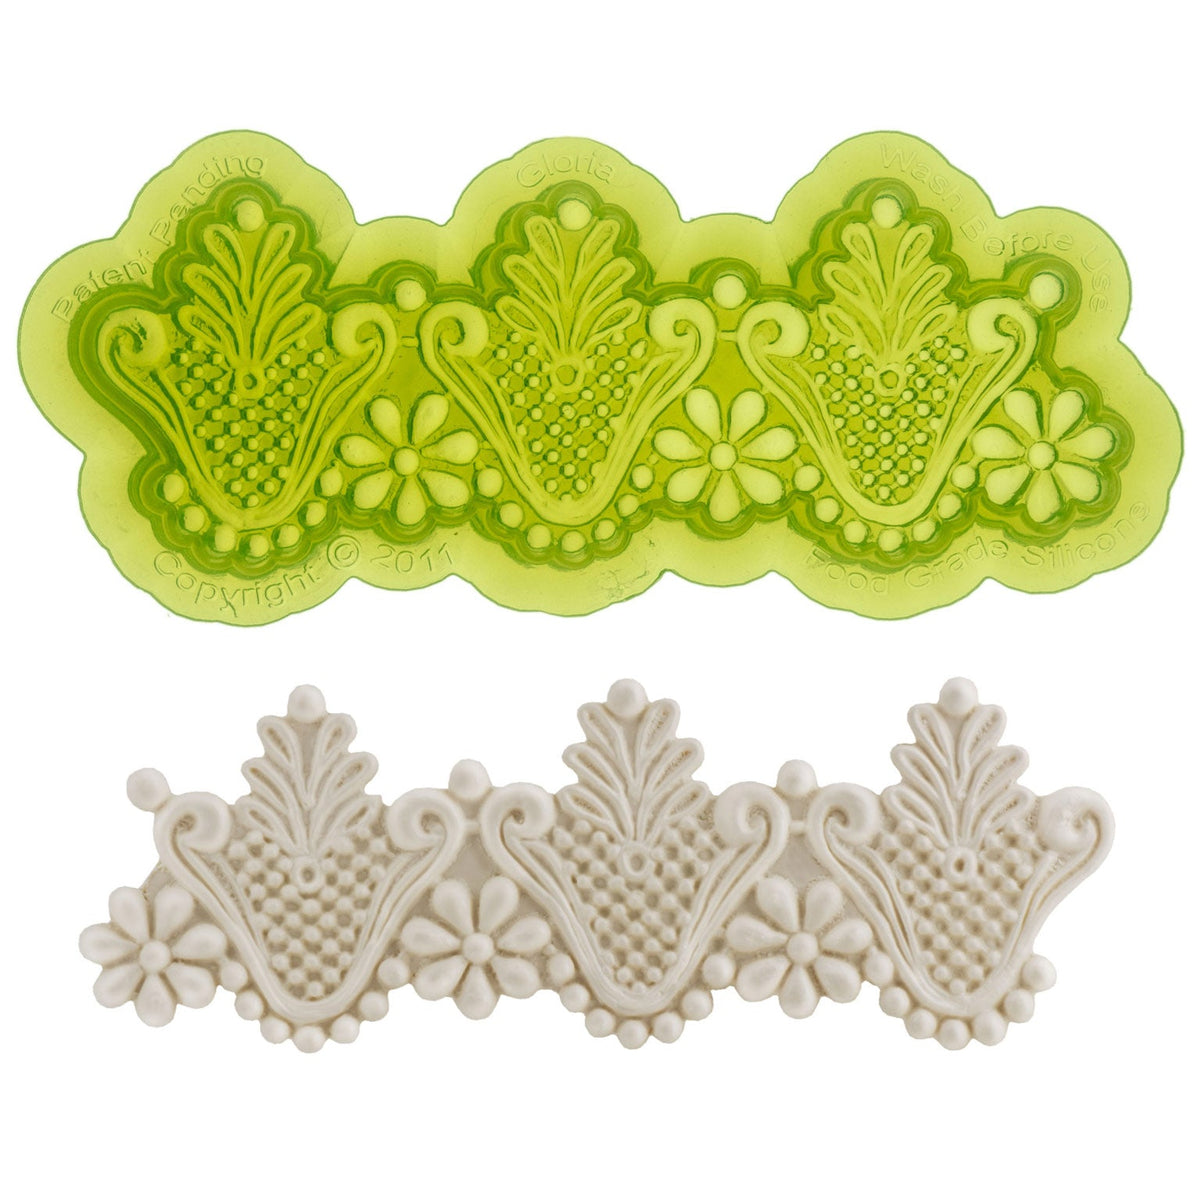 Gloria Lace Food Safe Silicone Mold for Fondant Cake Decorating by Marvelous Molds'